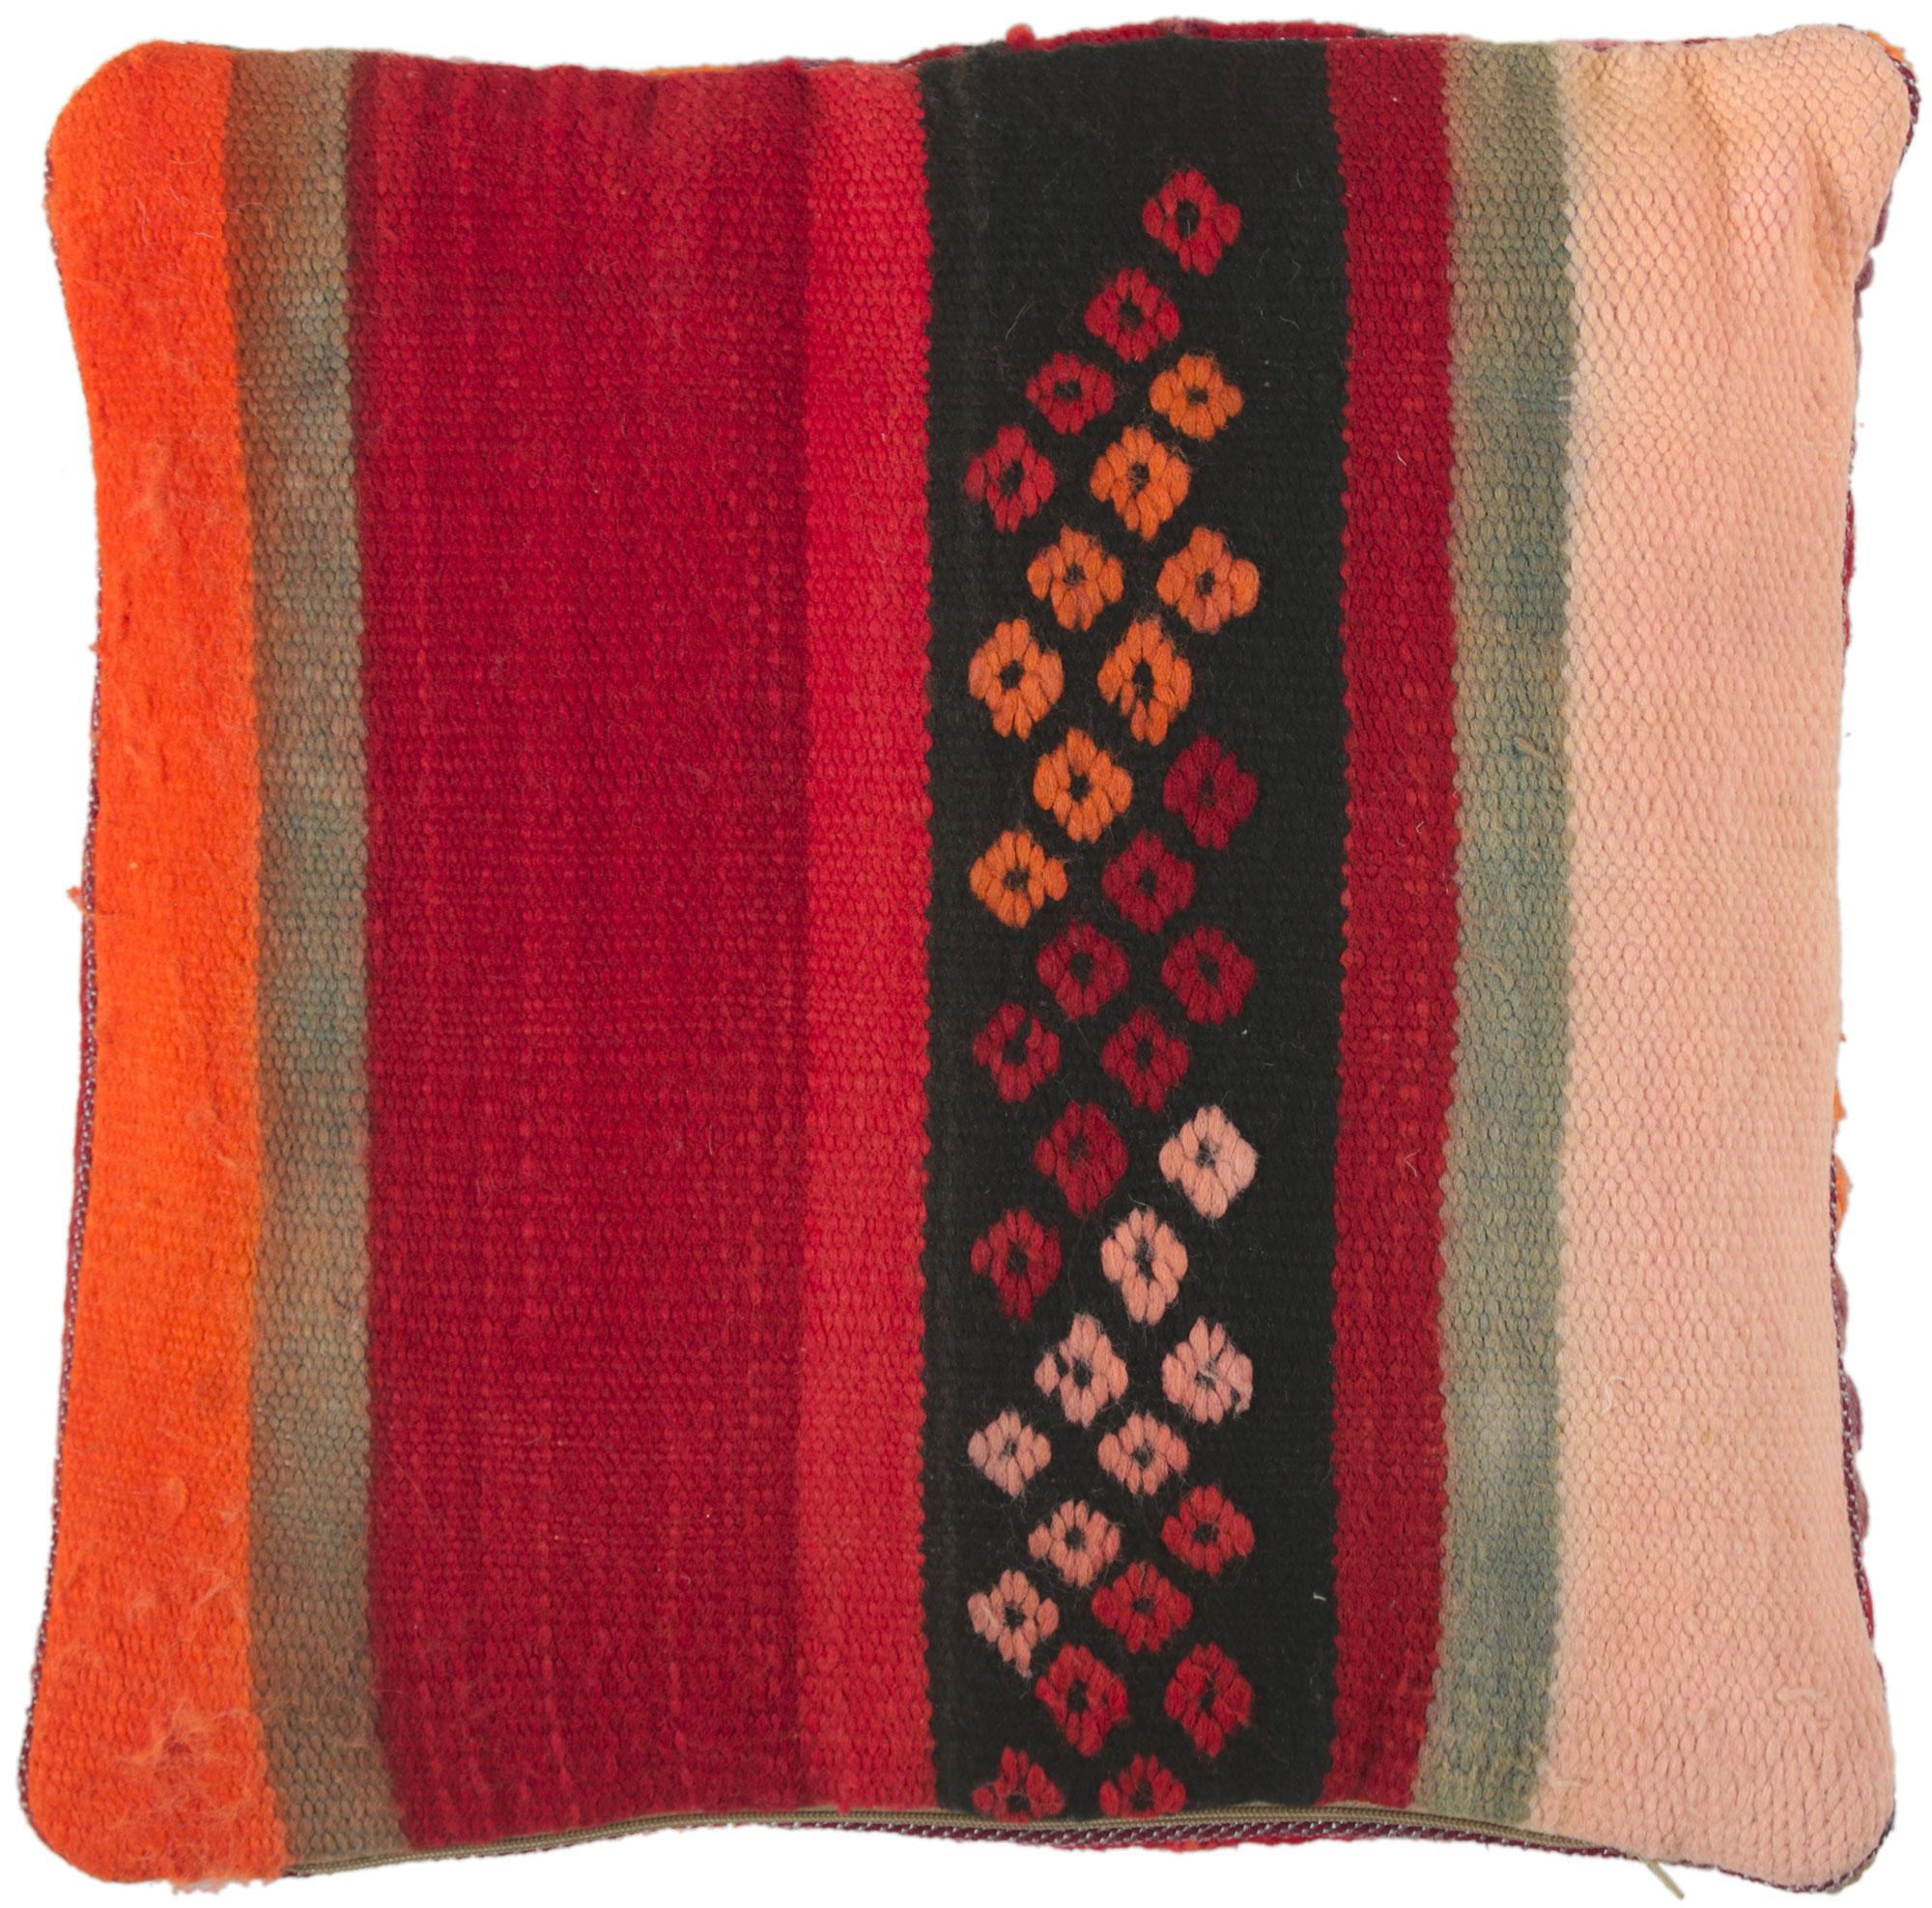 Vintage Moroccan Rug Pillow by Berber Tribes of Morocco For Sale 2